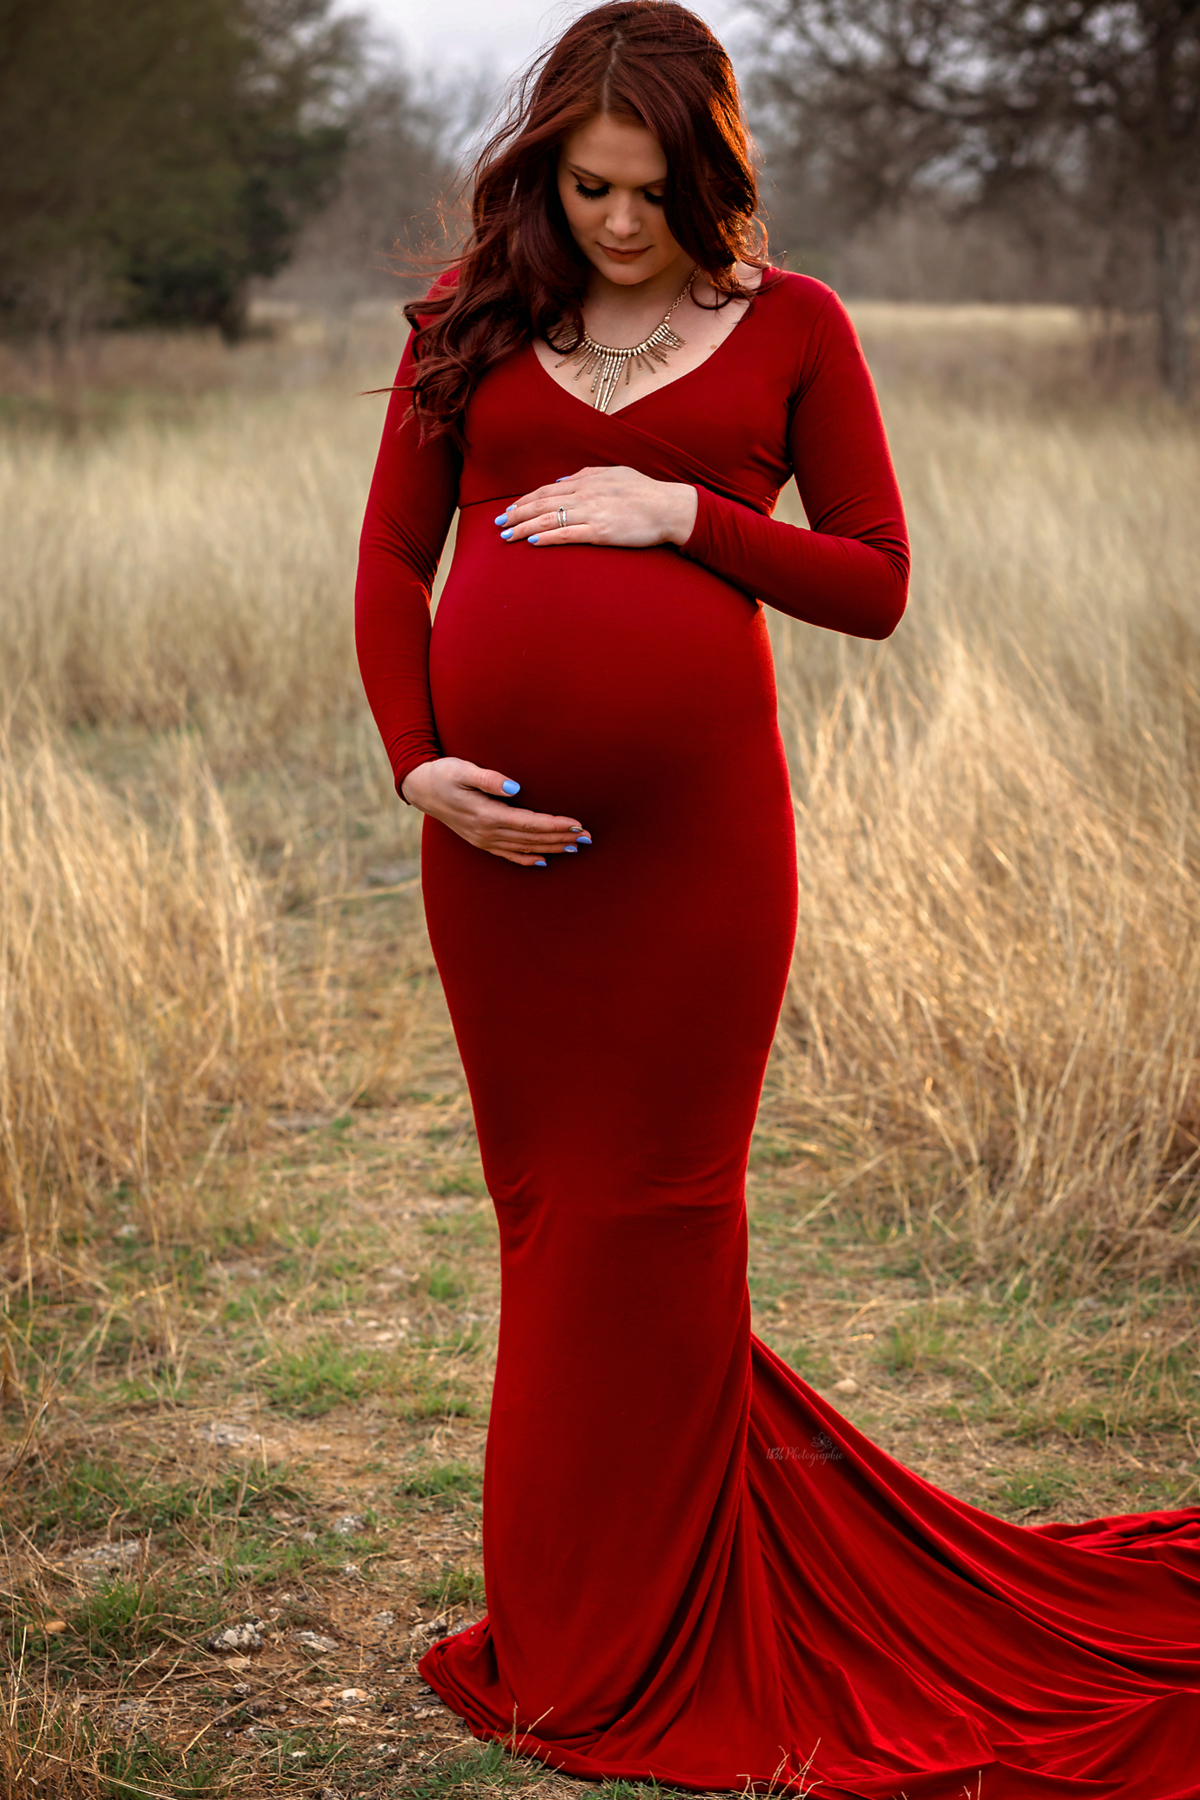 Create winter field dreams with our maternity and family session near San Antonio. Laid-back parents, our mom-to-be's scarlet flying dress adds love and warmth to your family portraits.